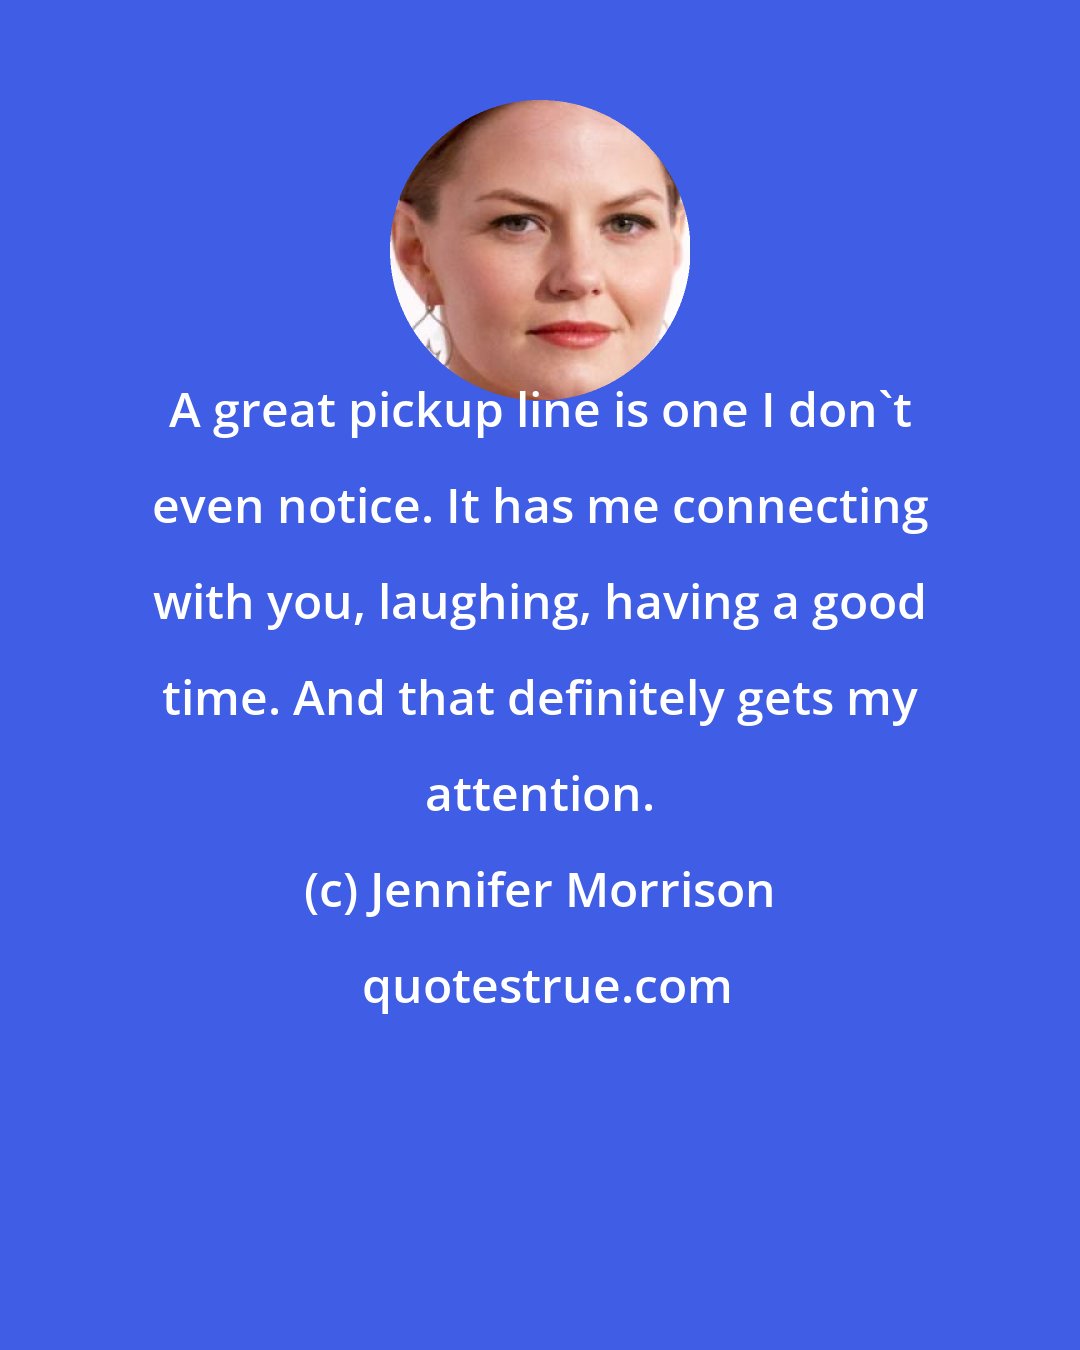 Jennifer Morrison: A great pickup line is one I don't even notice. It has me connecting with you, laughing, having a good time. And that definitely gets my attention.